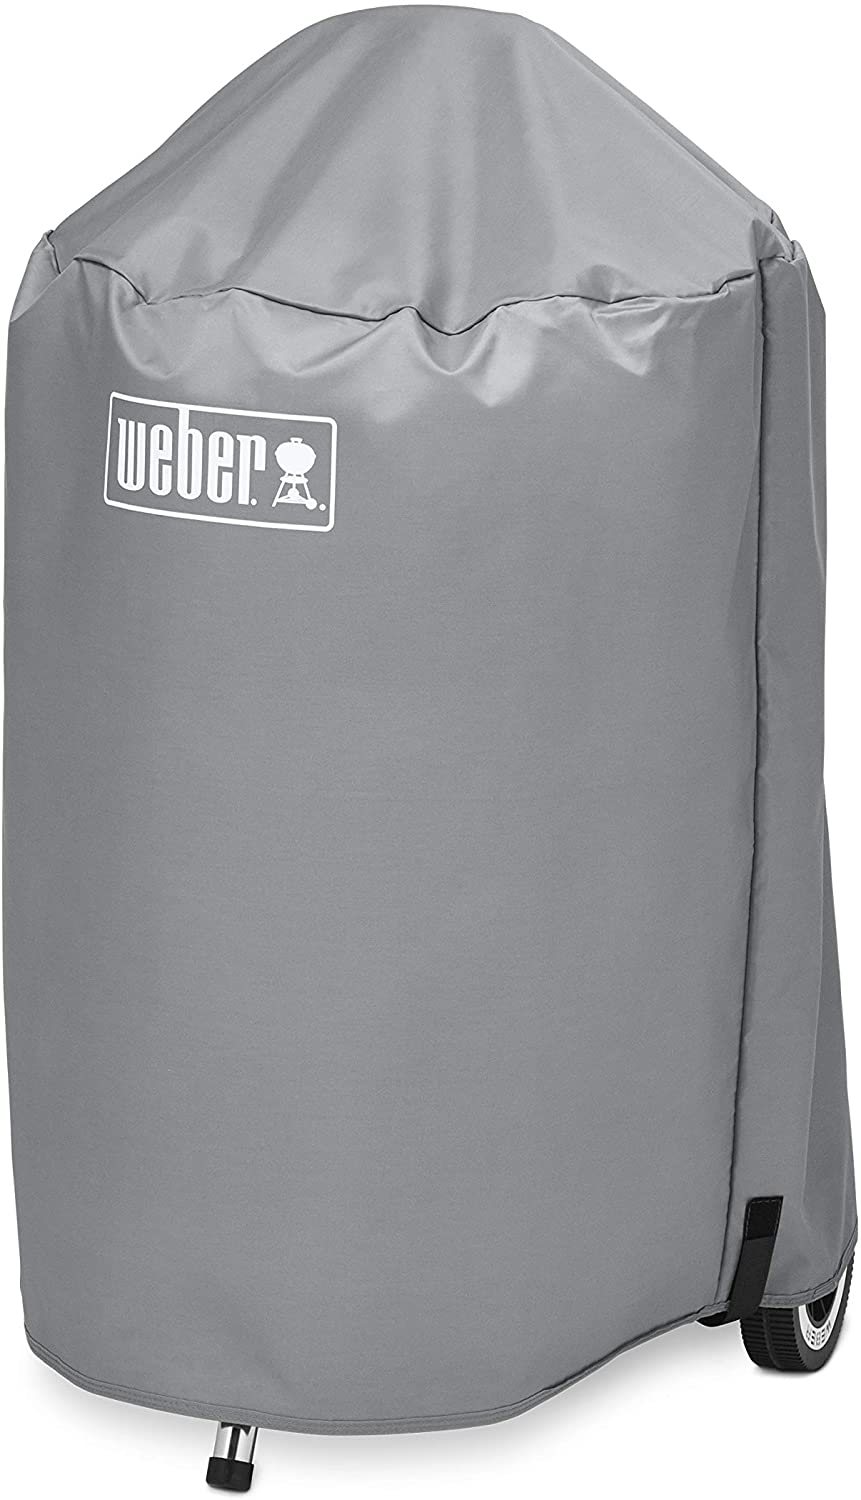 Weber Available 7175 18 Inch Charcoal Kettle Grill Cover, Black, 15.9 x 22.7 x 3.8 cm